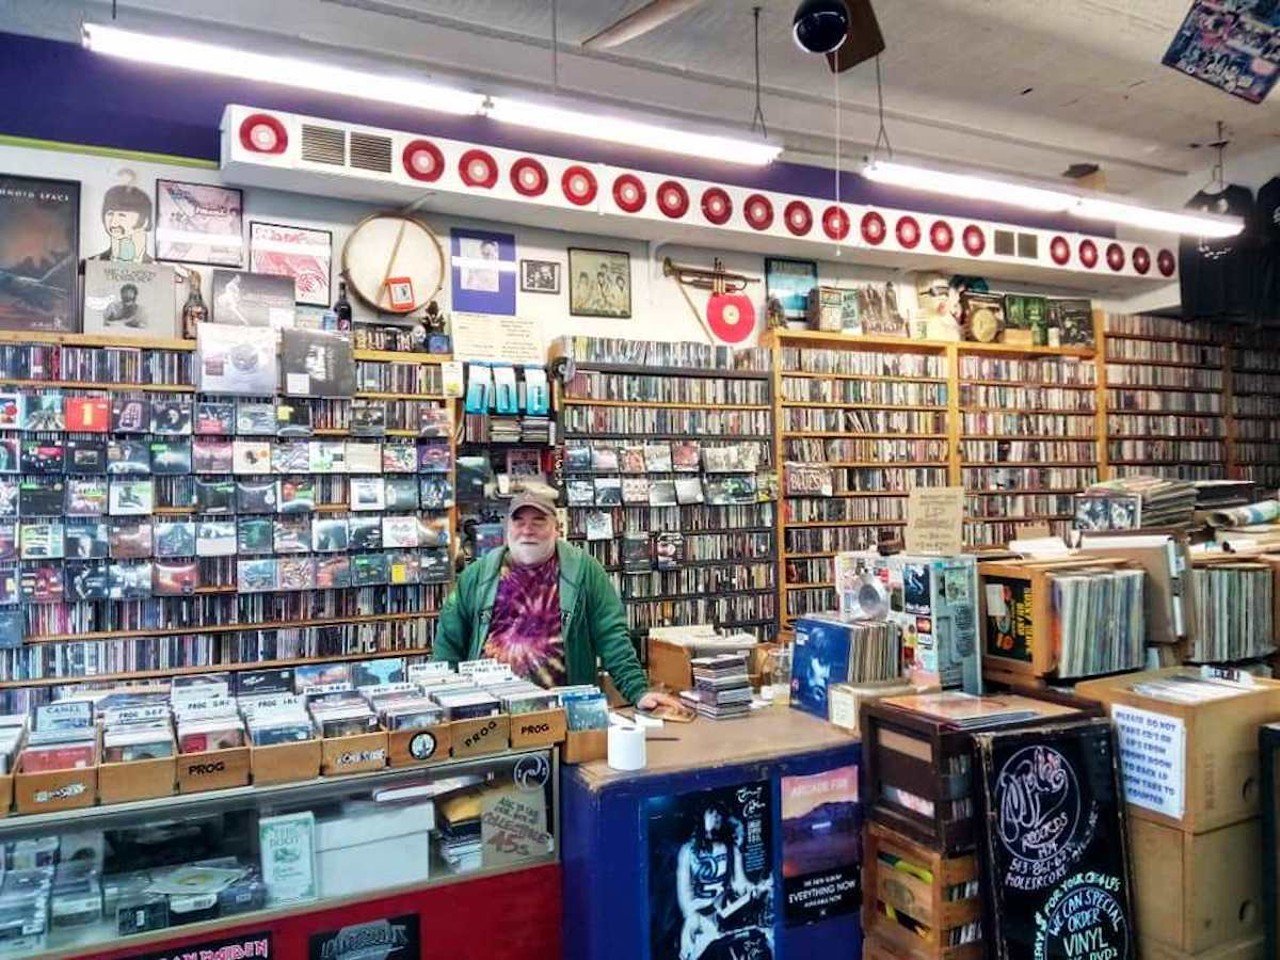 Mole's Record Exchange – Cincinnati's Oldest Record Store – Closes
By Katherine Barrier
Just before its 49th birthday, Mole’s Record Exchange closed for good on June 3. Ric Hickey, a Mole’s employee at the time, said the closure was due to the University of Cincinnati’s expansion to Calhoun Street, where the store was located. Owner Dean Newman reportedly didn’t think the business would survive obstruction to the store's main entrance because of nearby construction. “Regardless of your age or taste in music, if you wandered into Mole’s you would find something to your liking 99% of the time. … Mole’s was always a store with character and characters,” Hickey said in a blogpost about the store’s closing.